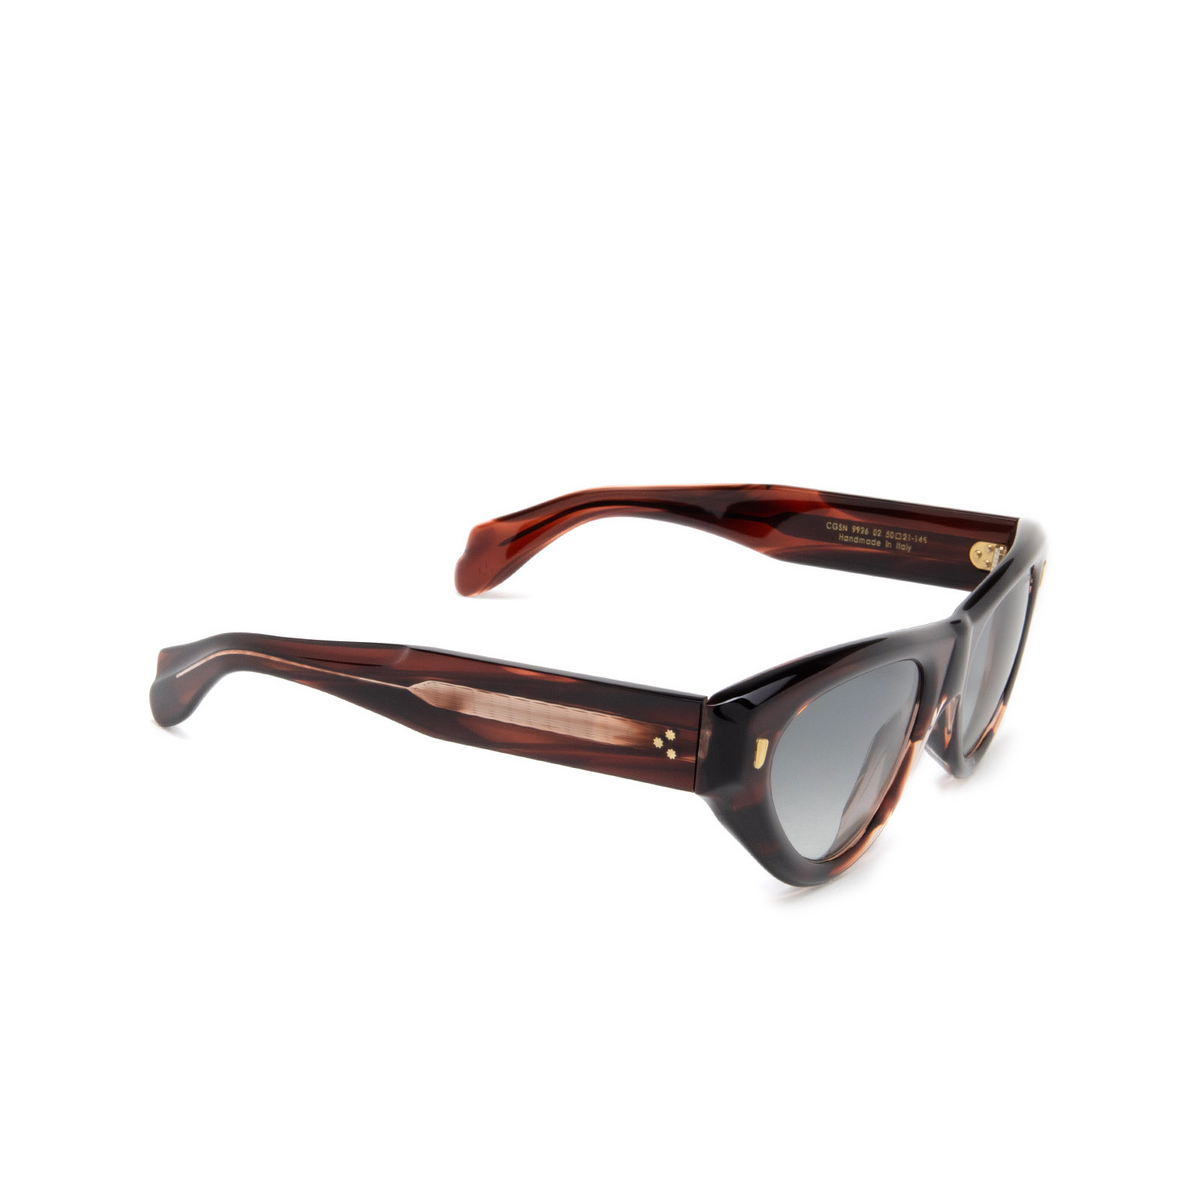 Cutler and Gross 9926 Sunglasses 02 Striped Brown Havana - three-quarters view